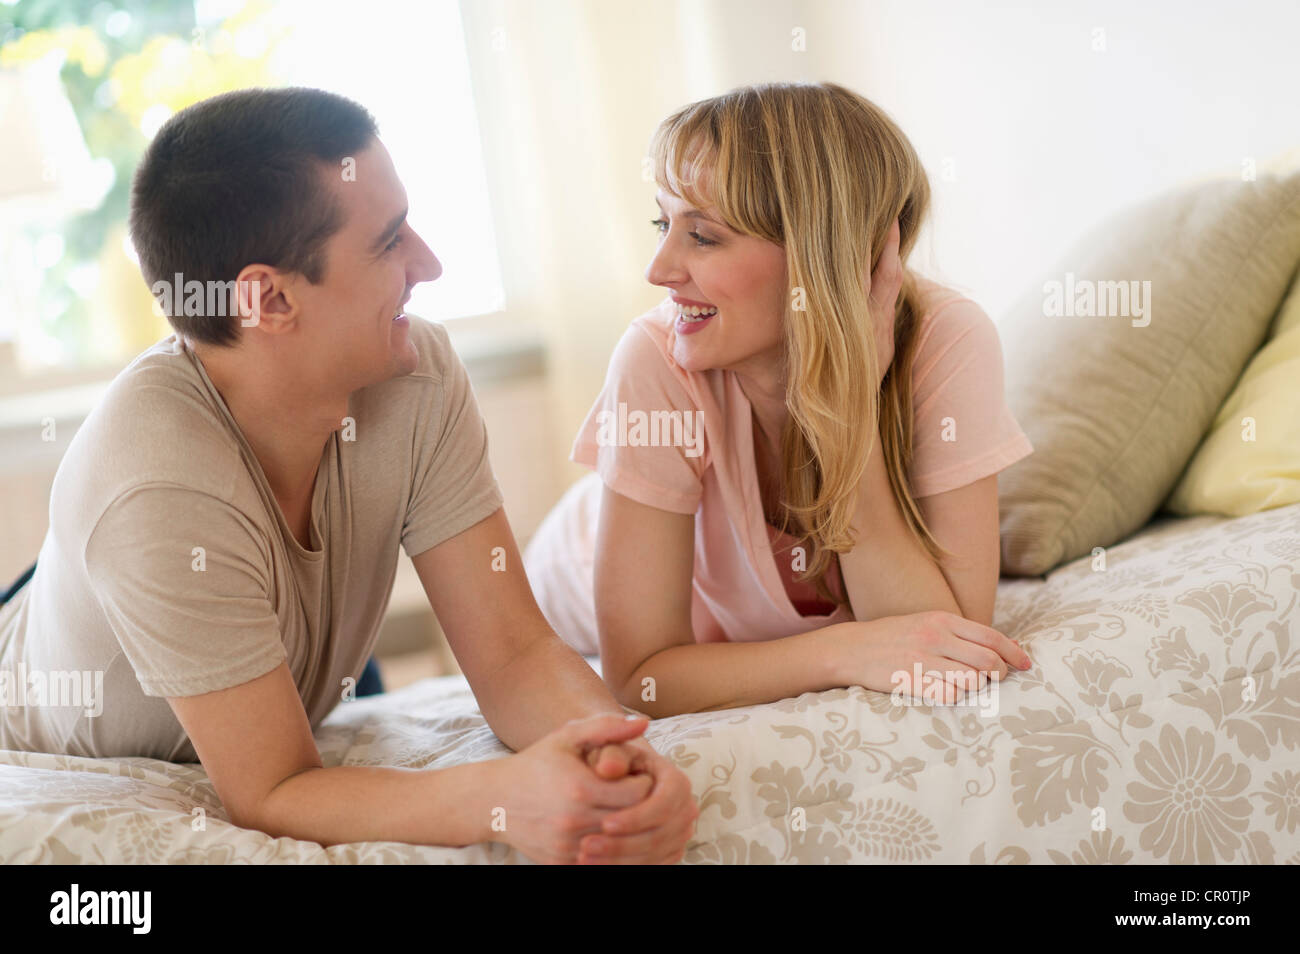 USA, New Jersey, Jersey City, Couple lying on bed Banque D'Images